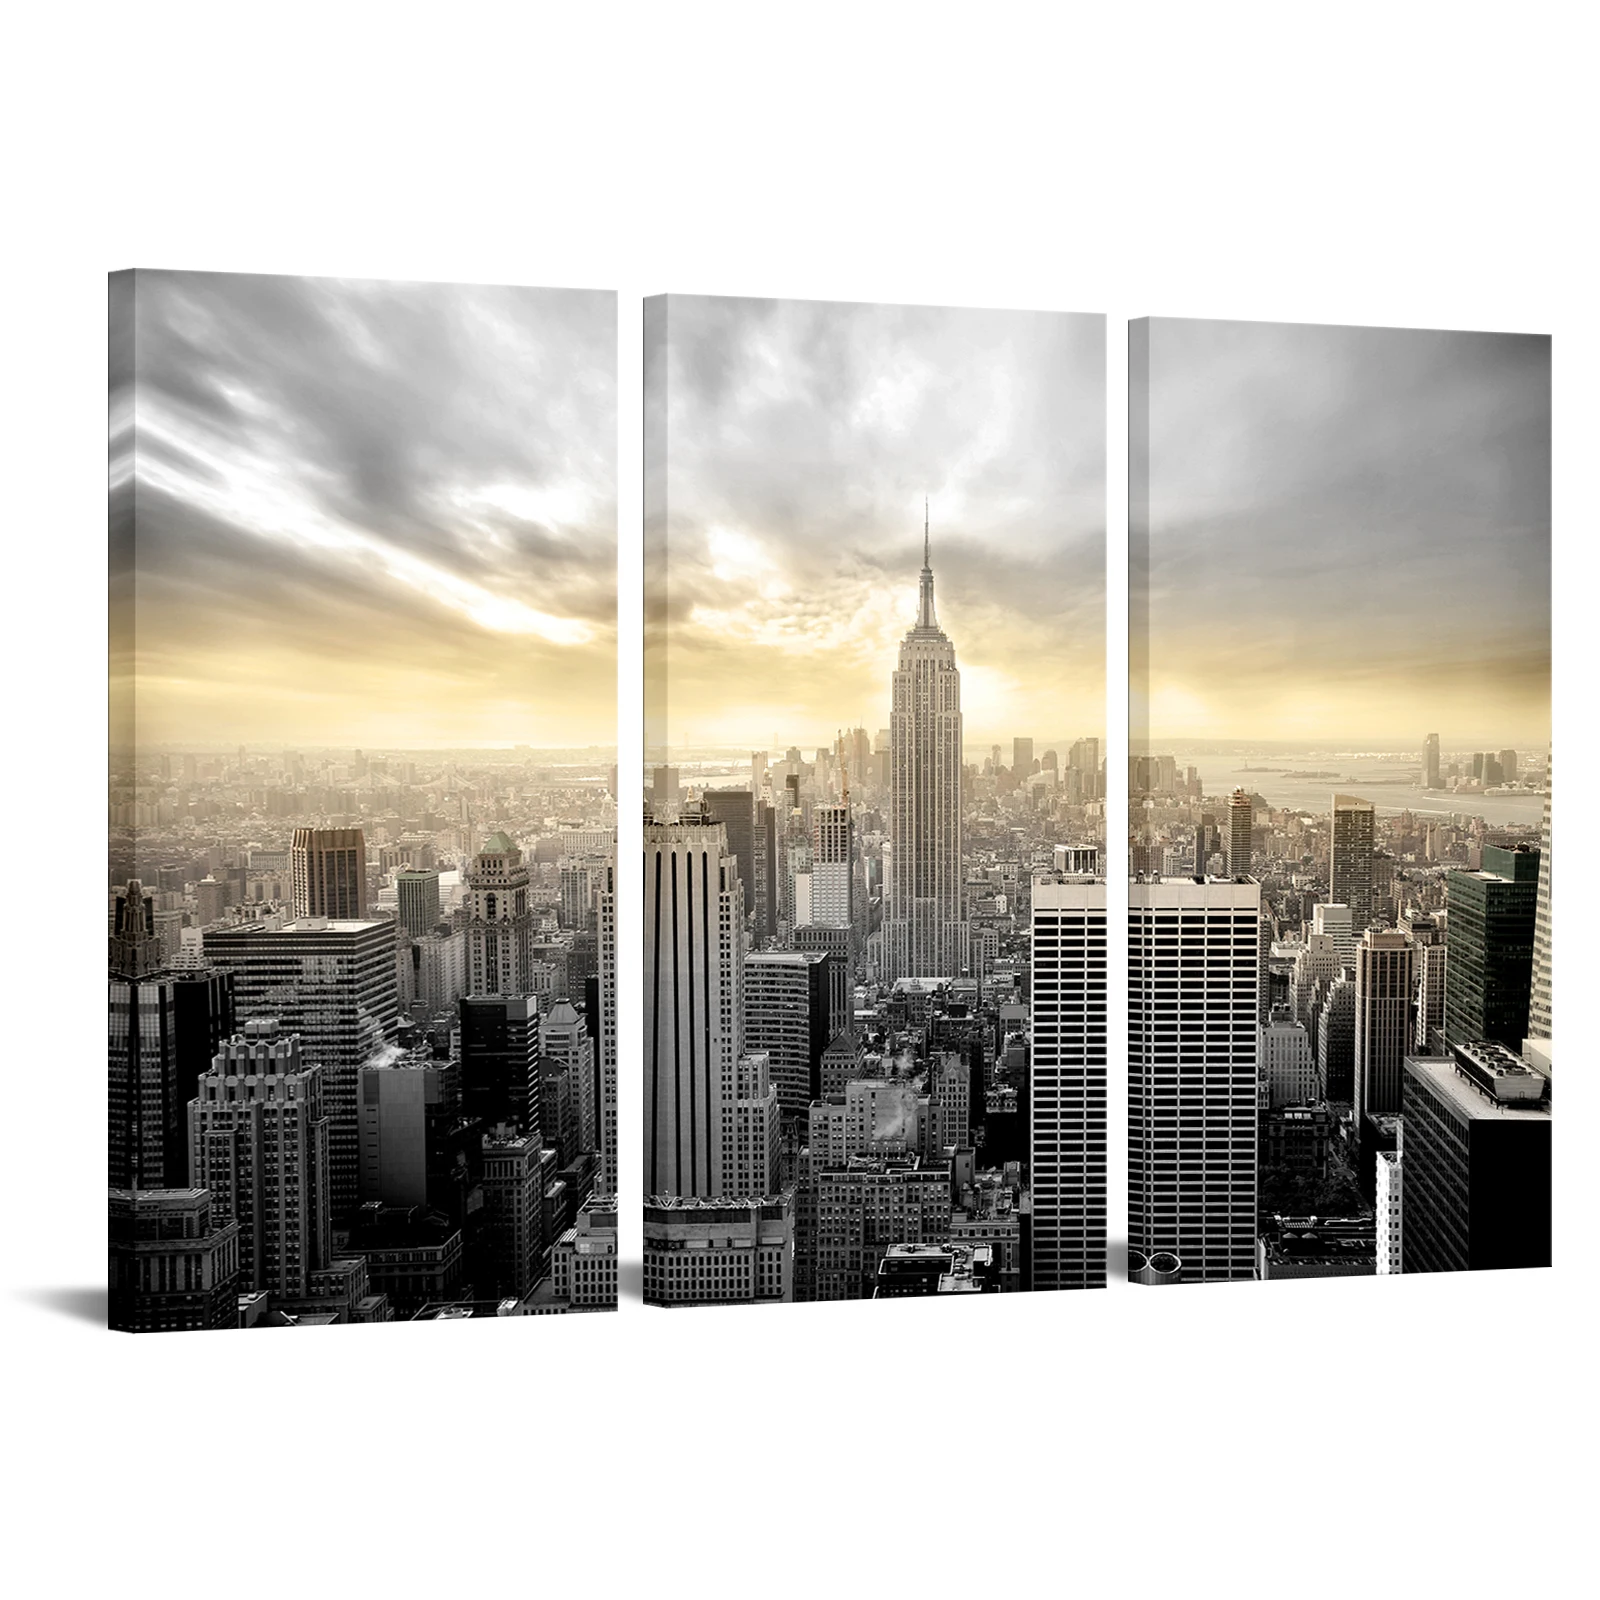 

3 Pieces City Landscape Poster Home Decor New York City Print Canvas Painting Modern Style Pictures Living Room Wall Art